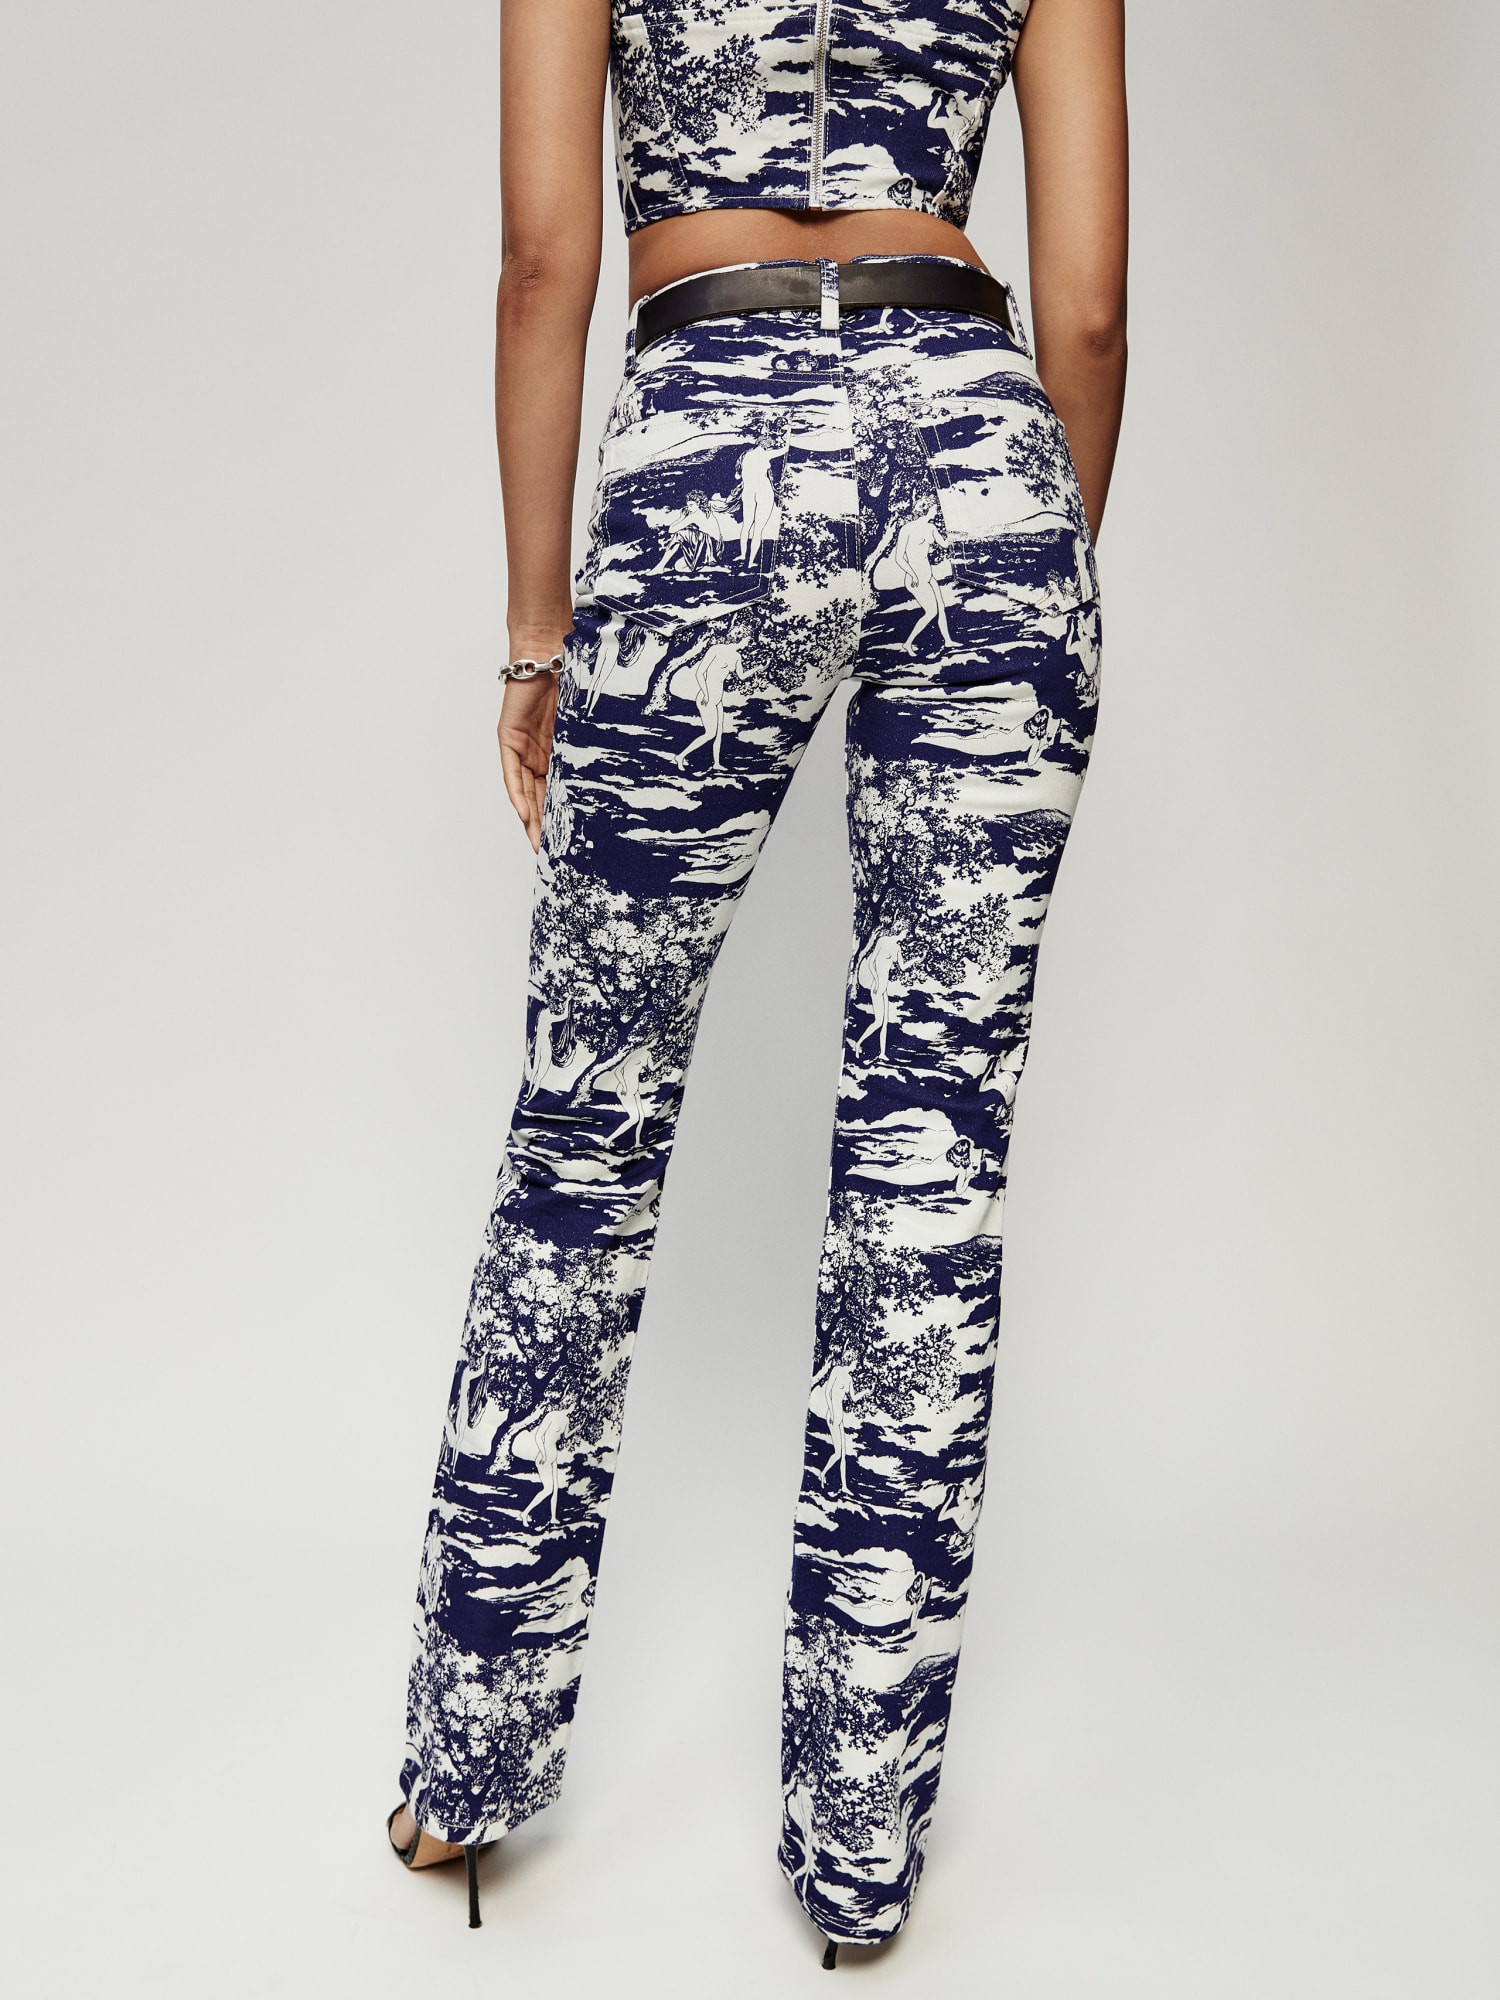 Reformation Peyton High Rise Bootcut Jeans in Blue